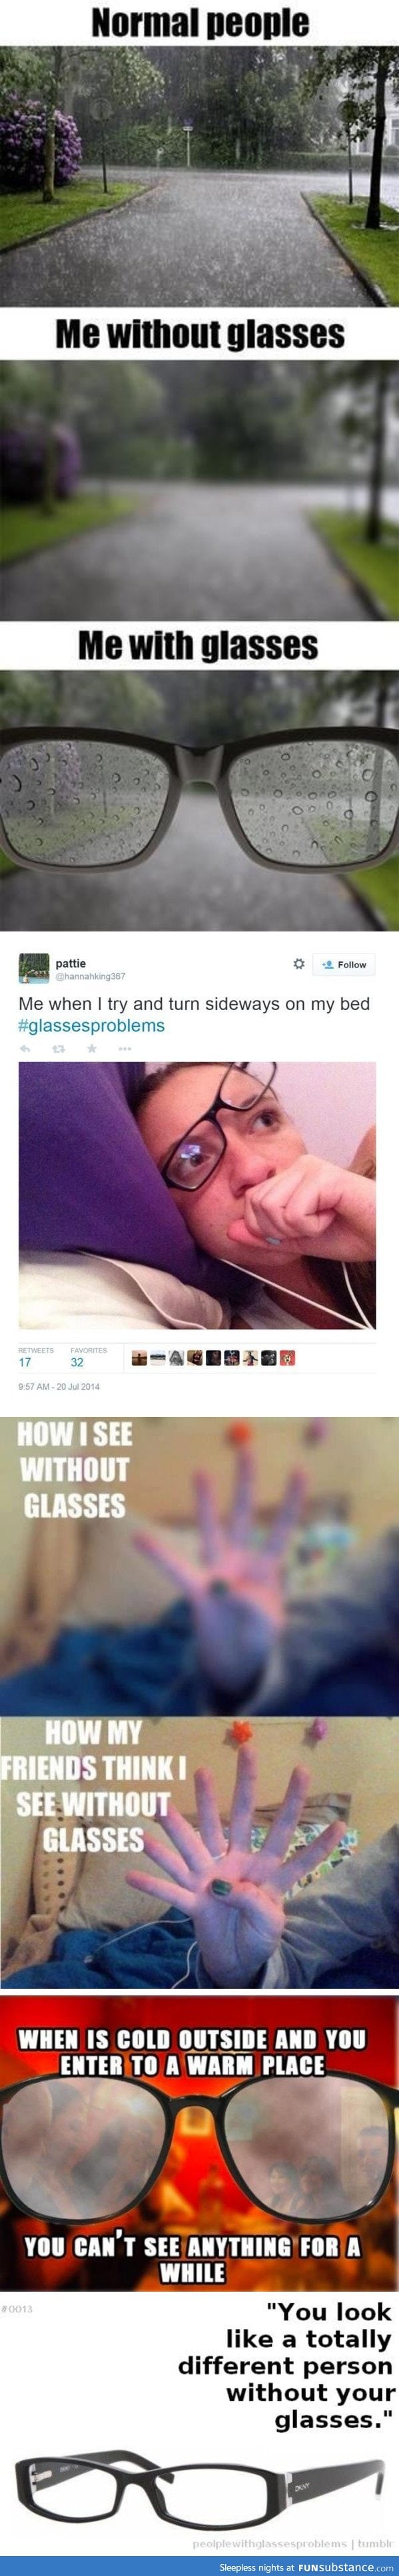 Glasses people problems